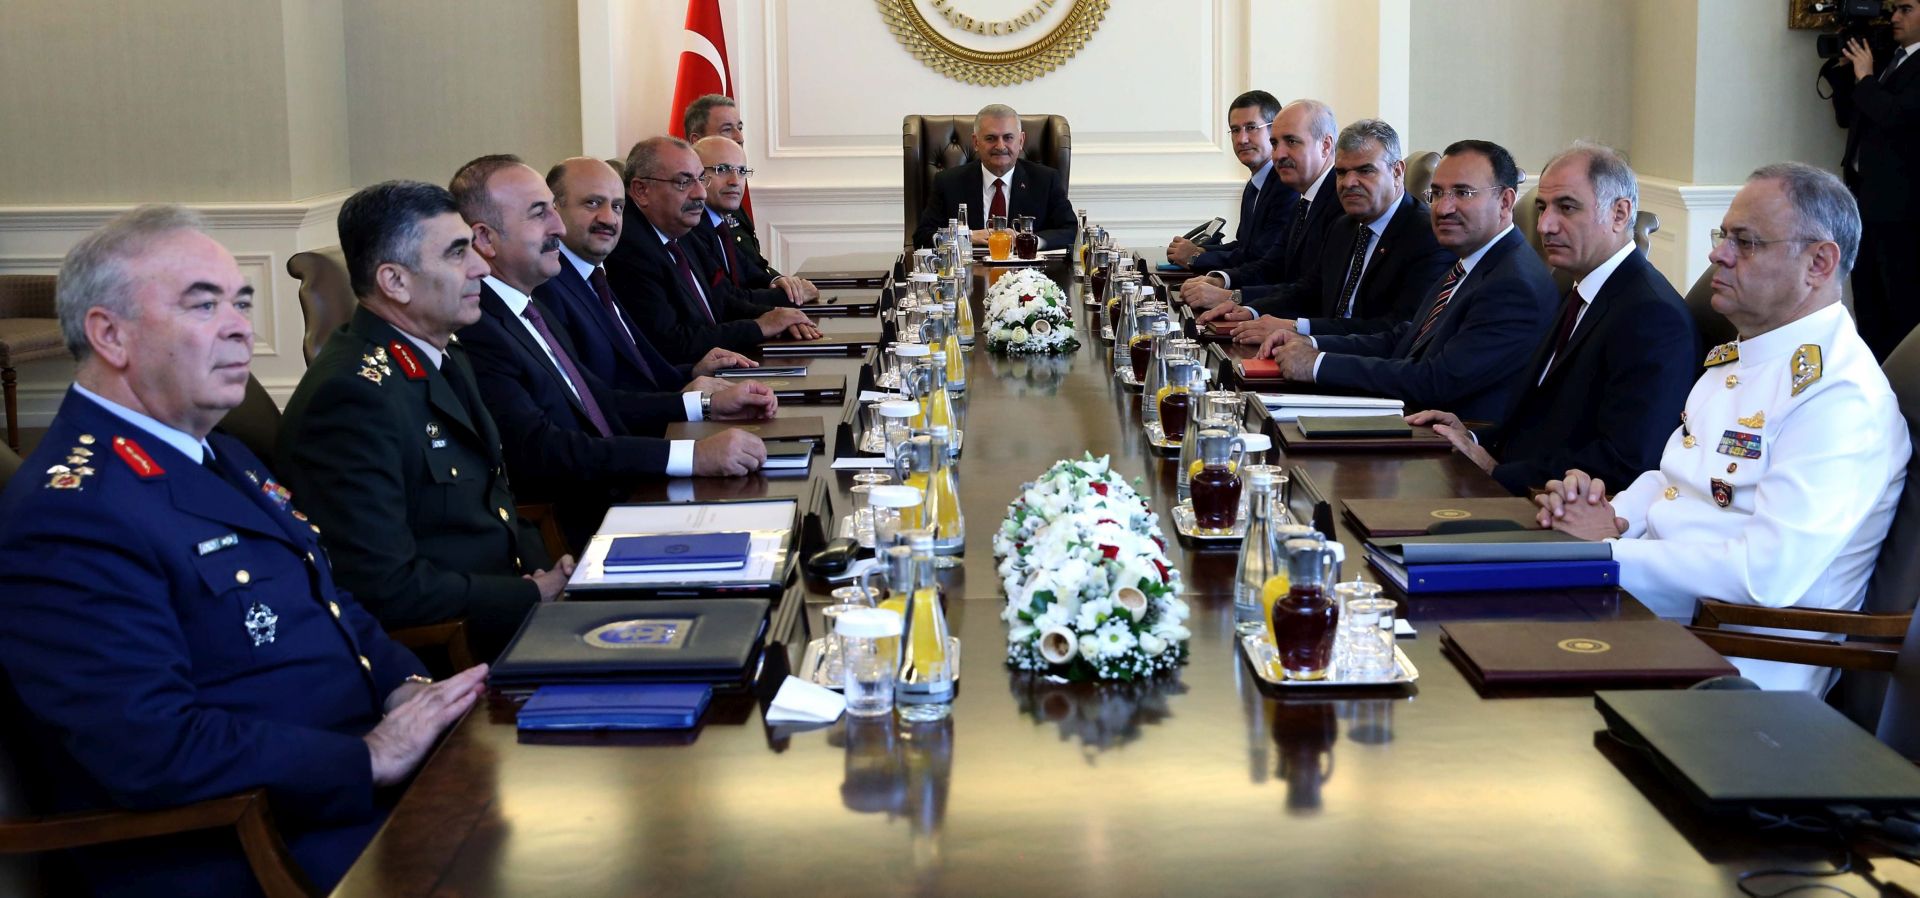 epa05507393 A handout picture provided by the Turkish Prime Minister's Press office on 23 August 2016 shows Turkish Prime Minister Binali Yildirim (C), Chief of Staff General Hulusi Akar (7-L) and other members of the Turkish Supreme Military Council during their meeting in Ankara, Turkey, 23 August 2016. Others are not identified. Media reports say that is was the second meeting of the council since the failed coup on 15 July.  EPA/TURKISH PRIME MINISTER PRESS OFFICE/HANDOUT  HANDOUT EDITORIAL USE ONLY/NO SALES